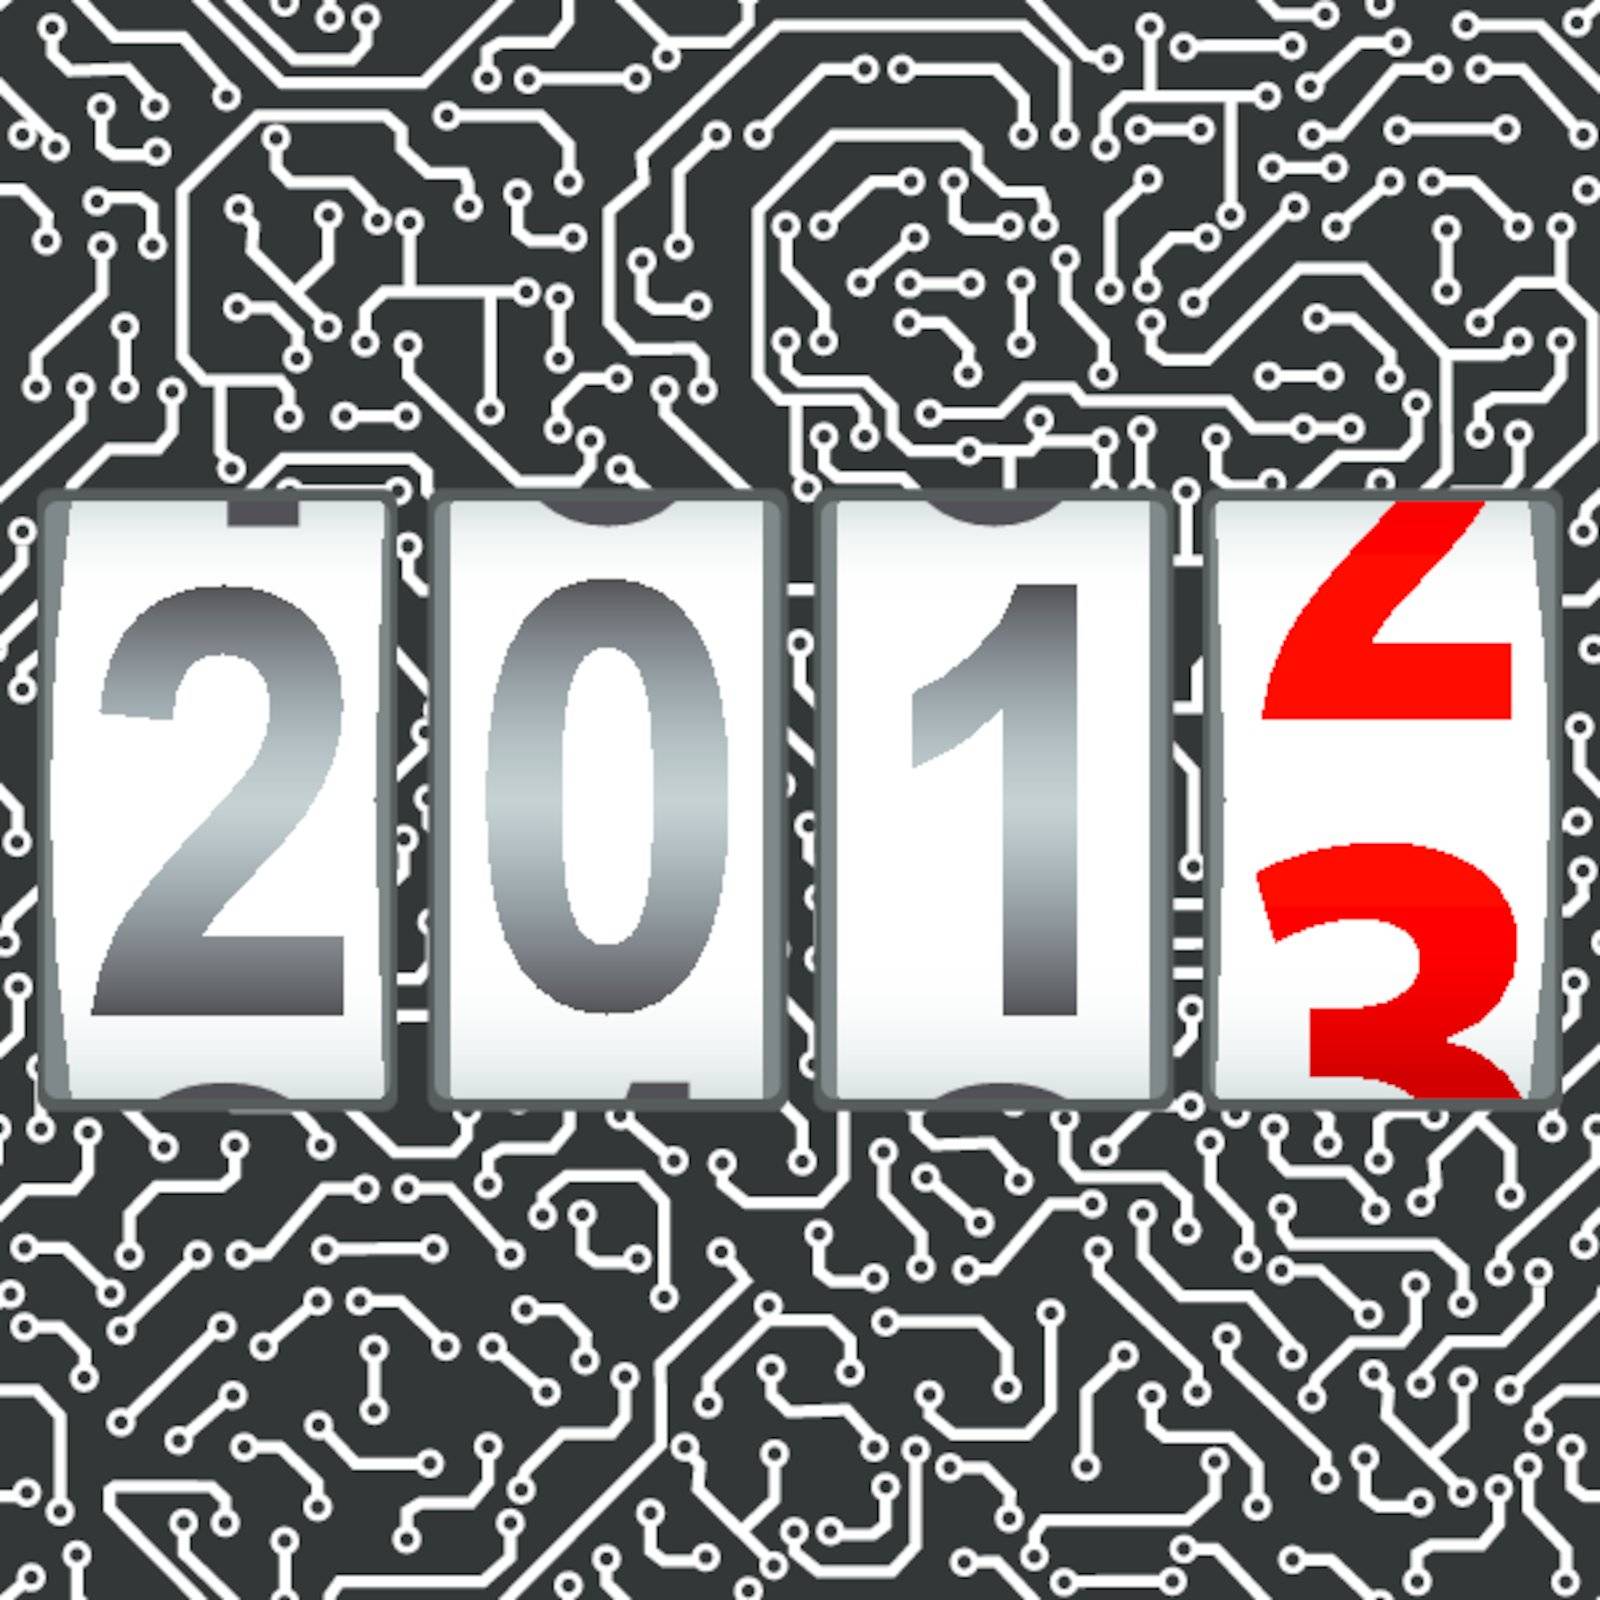 2013 New Year counter, vector. Seamless pattern.